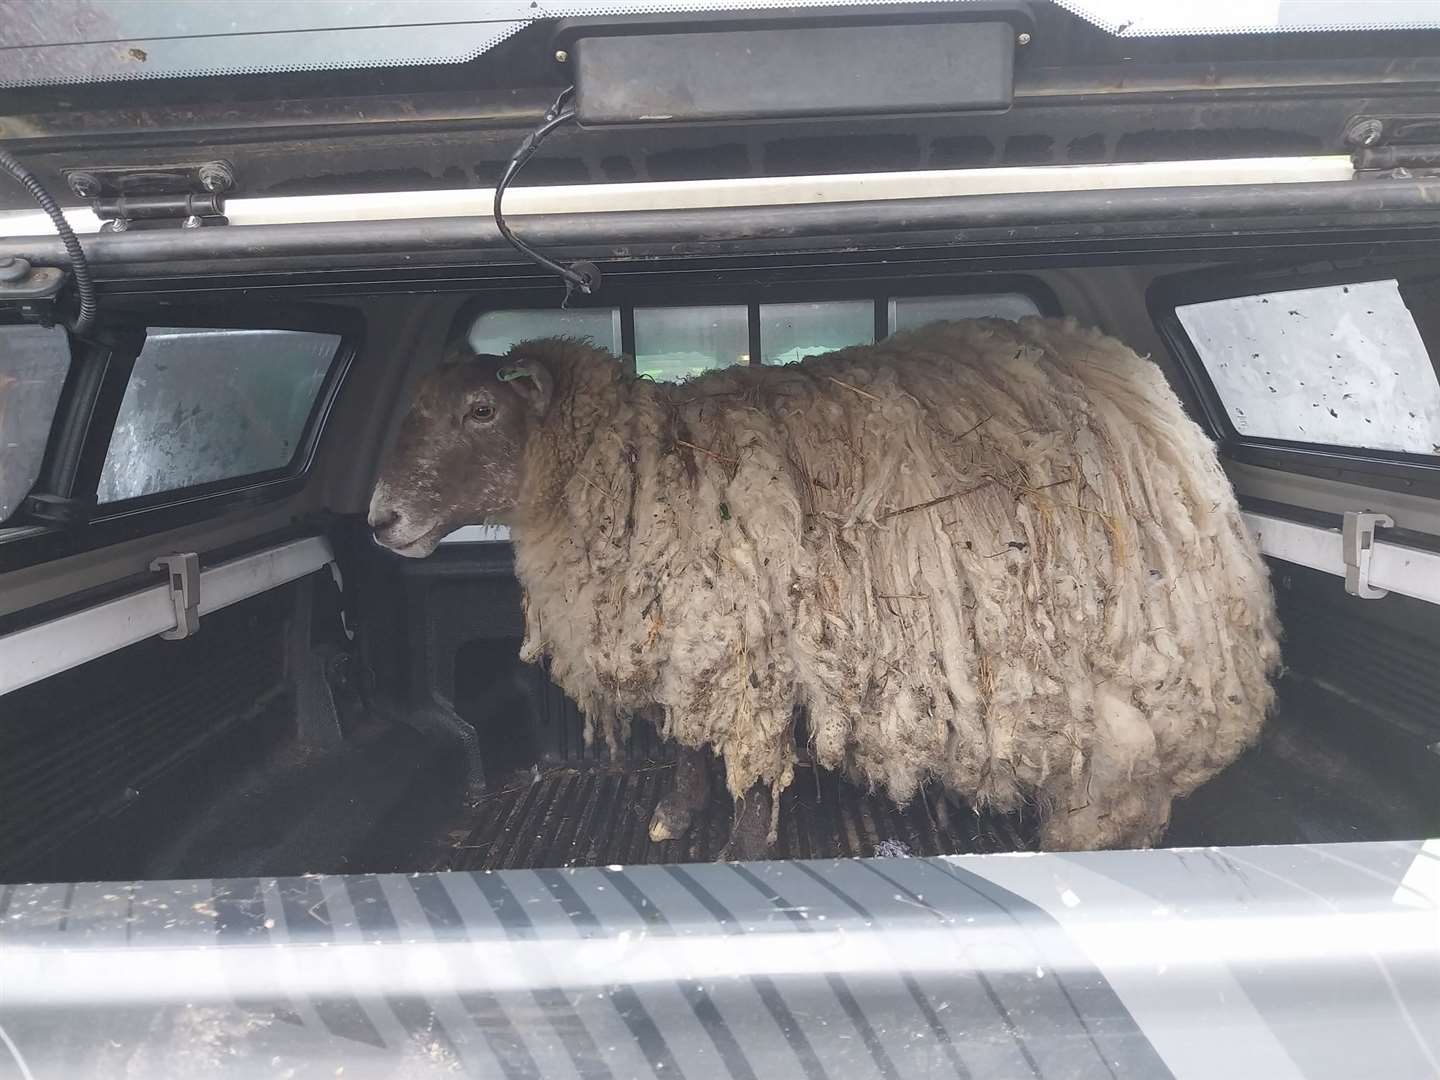 Fiona, also known as ‘Britain’s loneliest sheep’ has found a new home at Dalscone Farm in Dumfries following her dramatic rescue from the foot of a cliff near Sutherland.